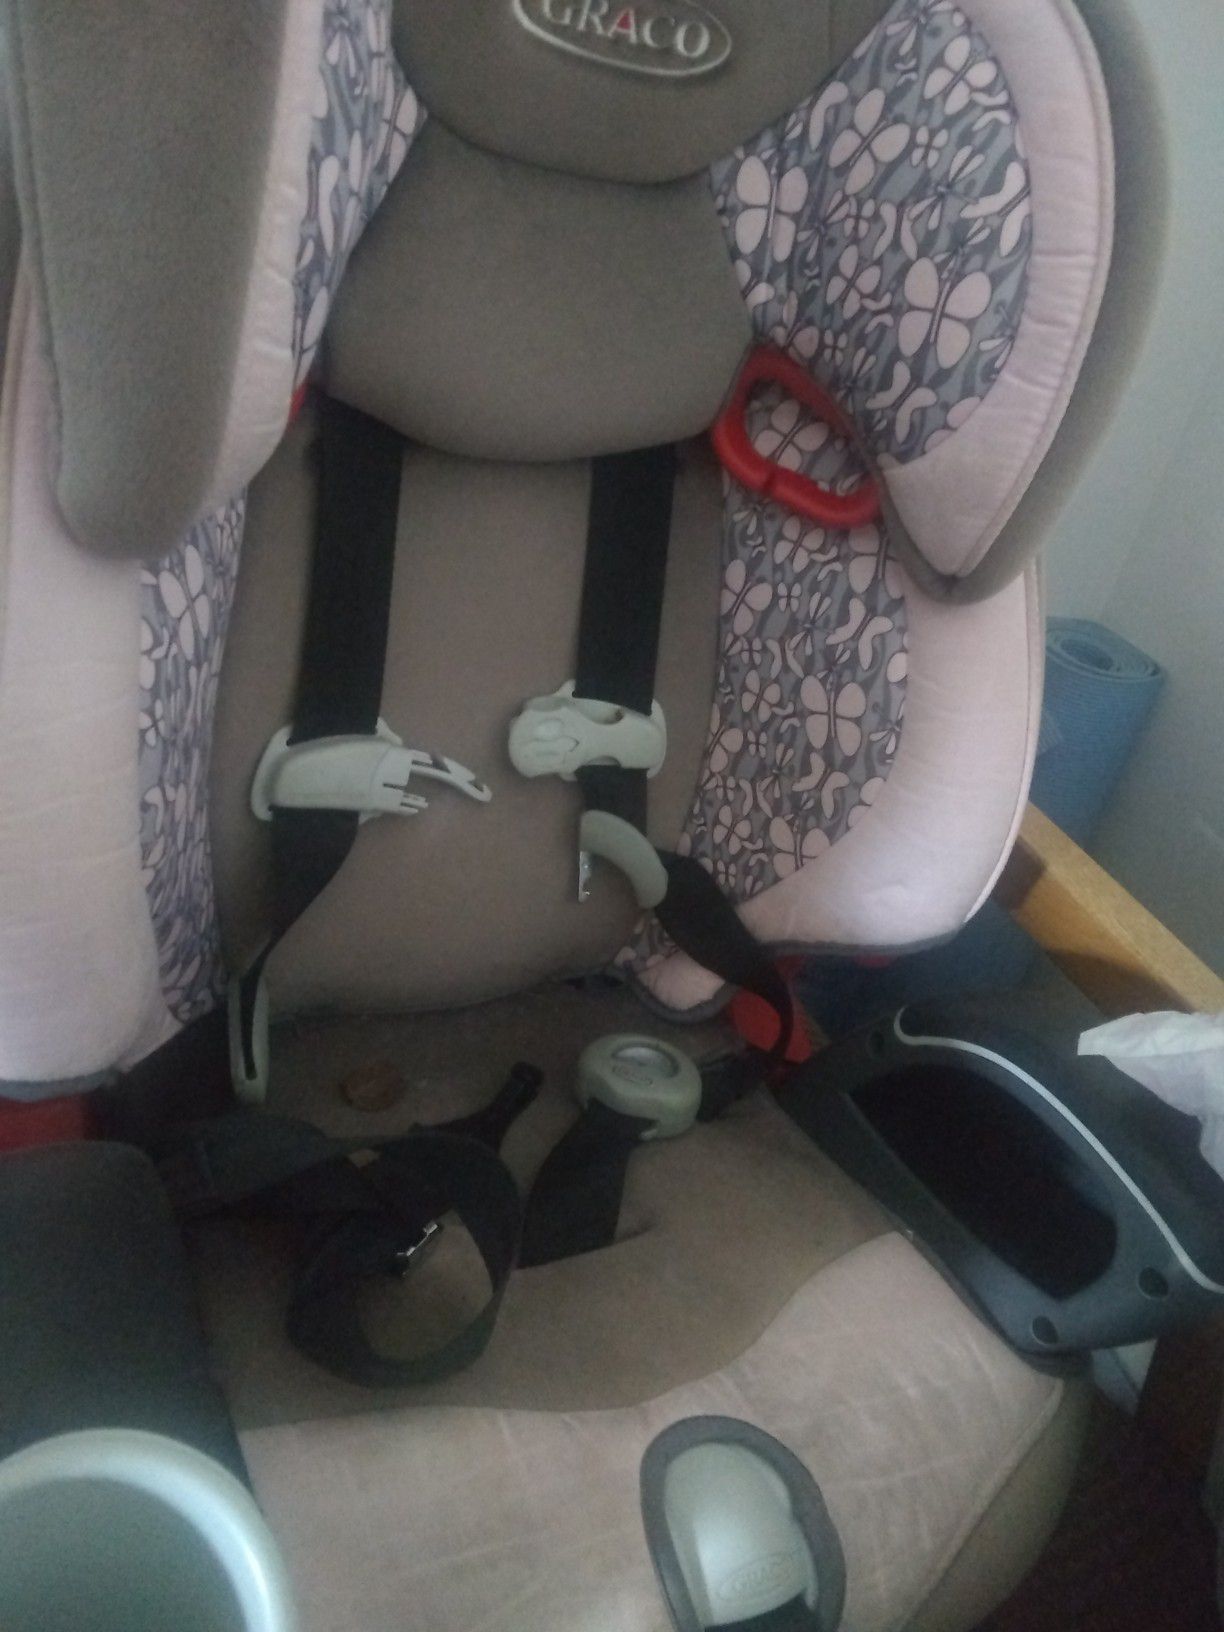 Graco booster seat with steel rods